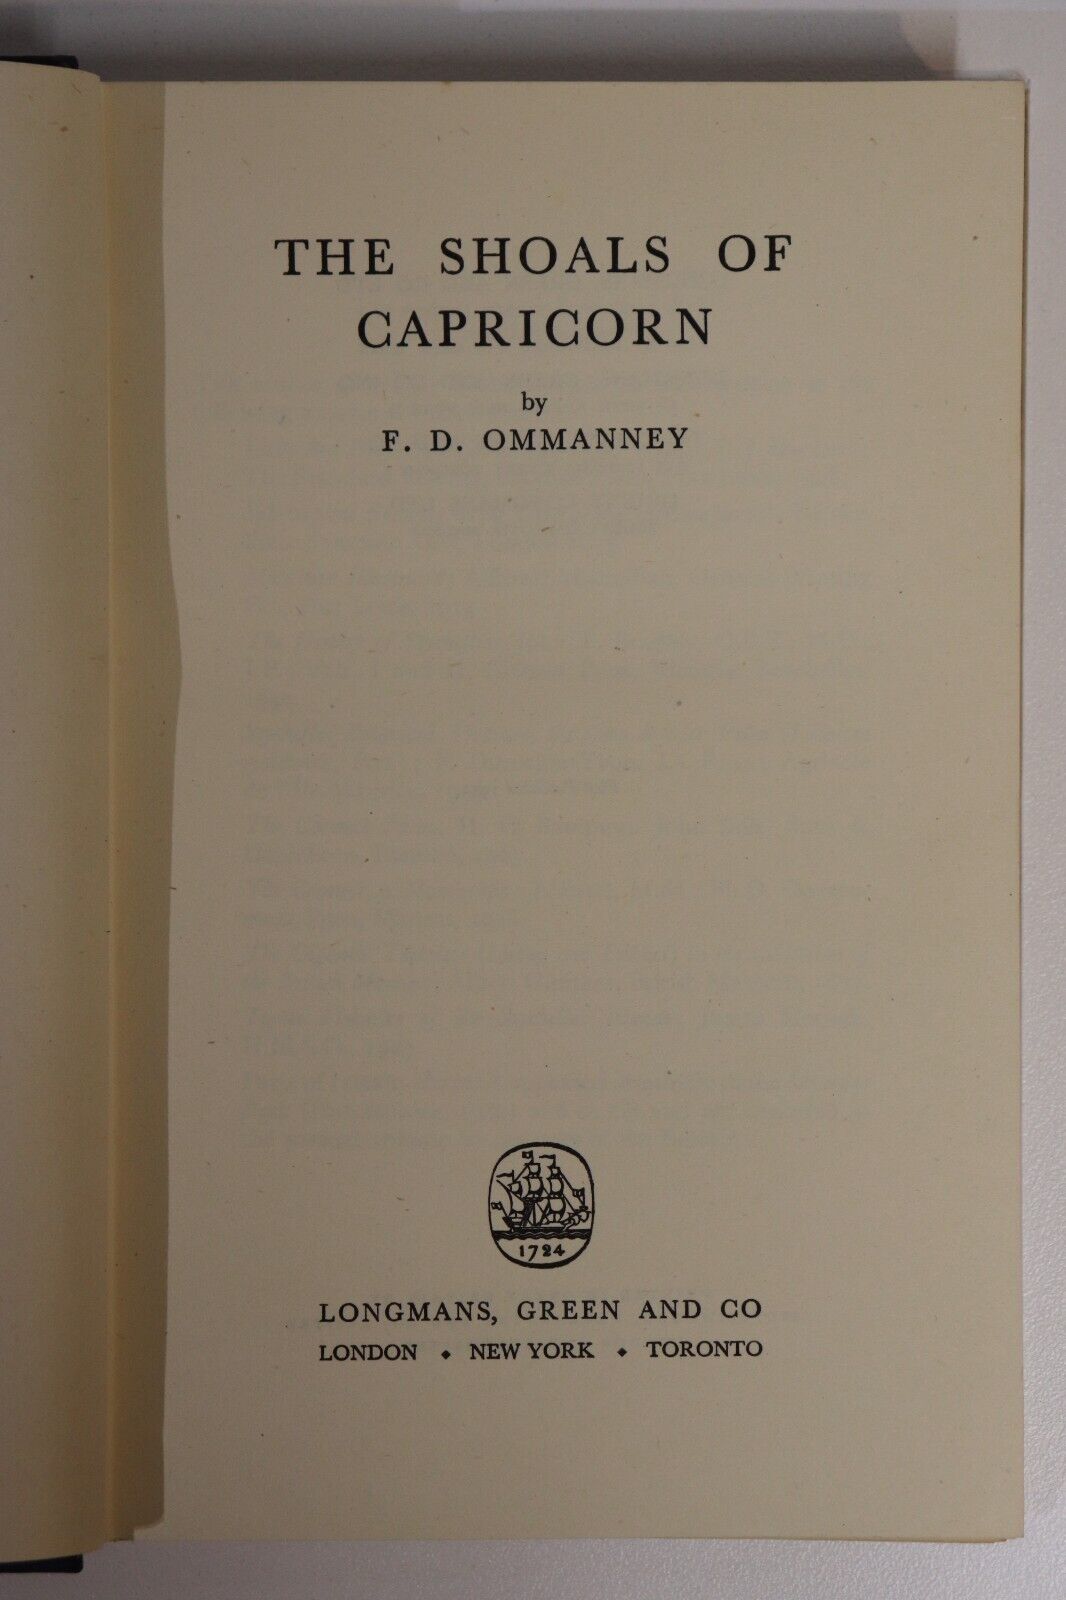 The Shoals Of Capricorn - 1952 - 1st Edition Maritime Exploration Book - 0